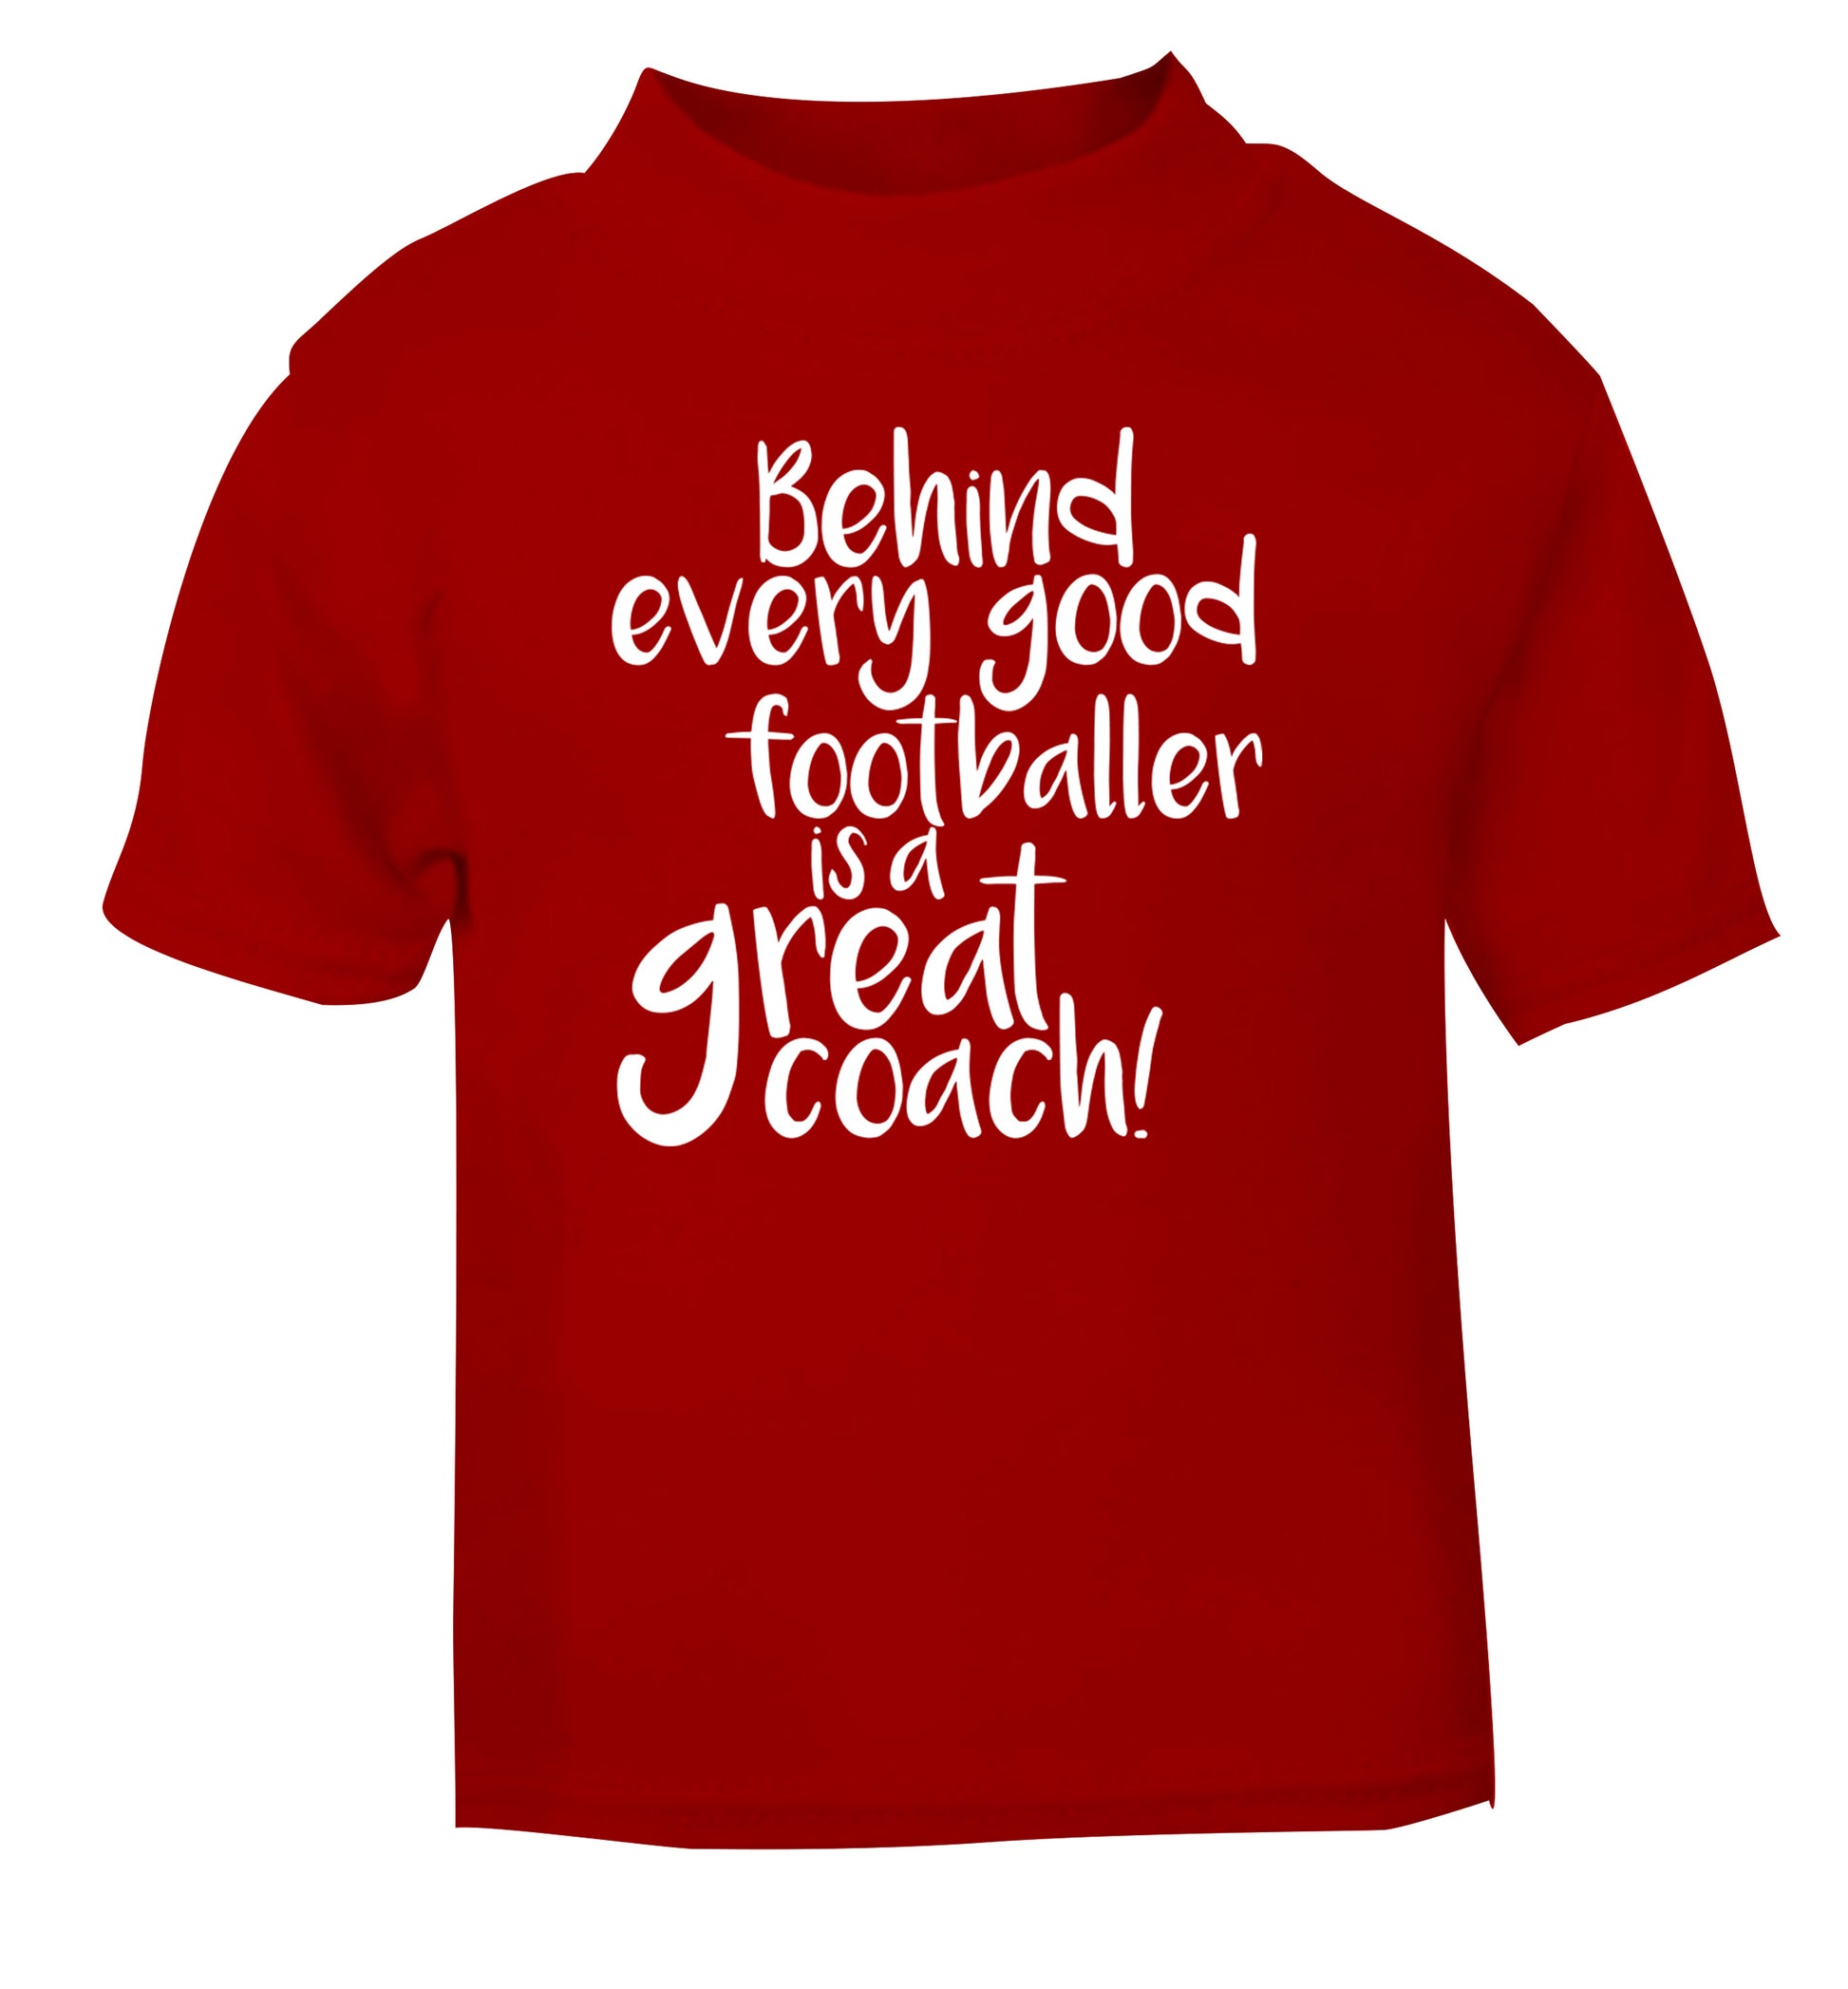 Behind every good footballer is a great coach! red Baby Toddler Tshirt 2 Years